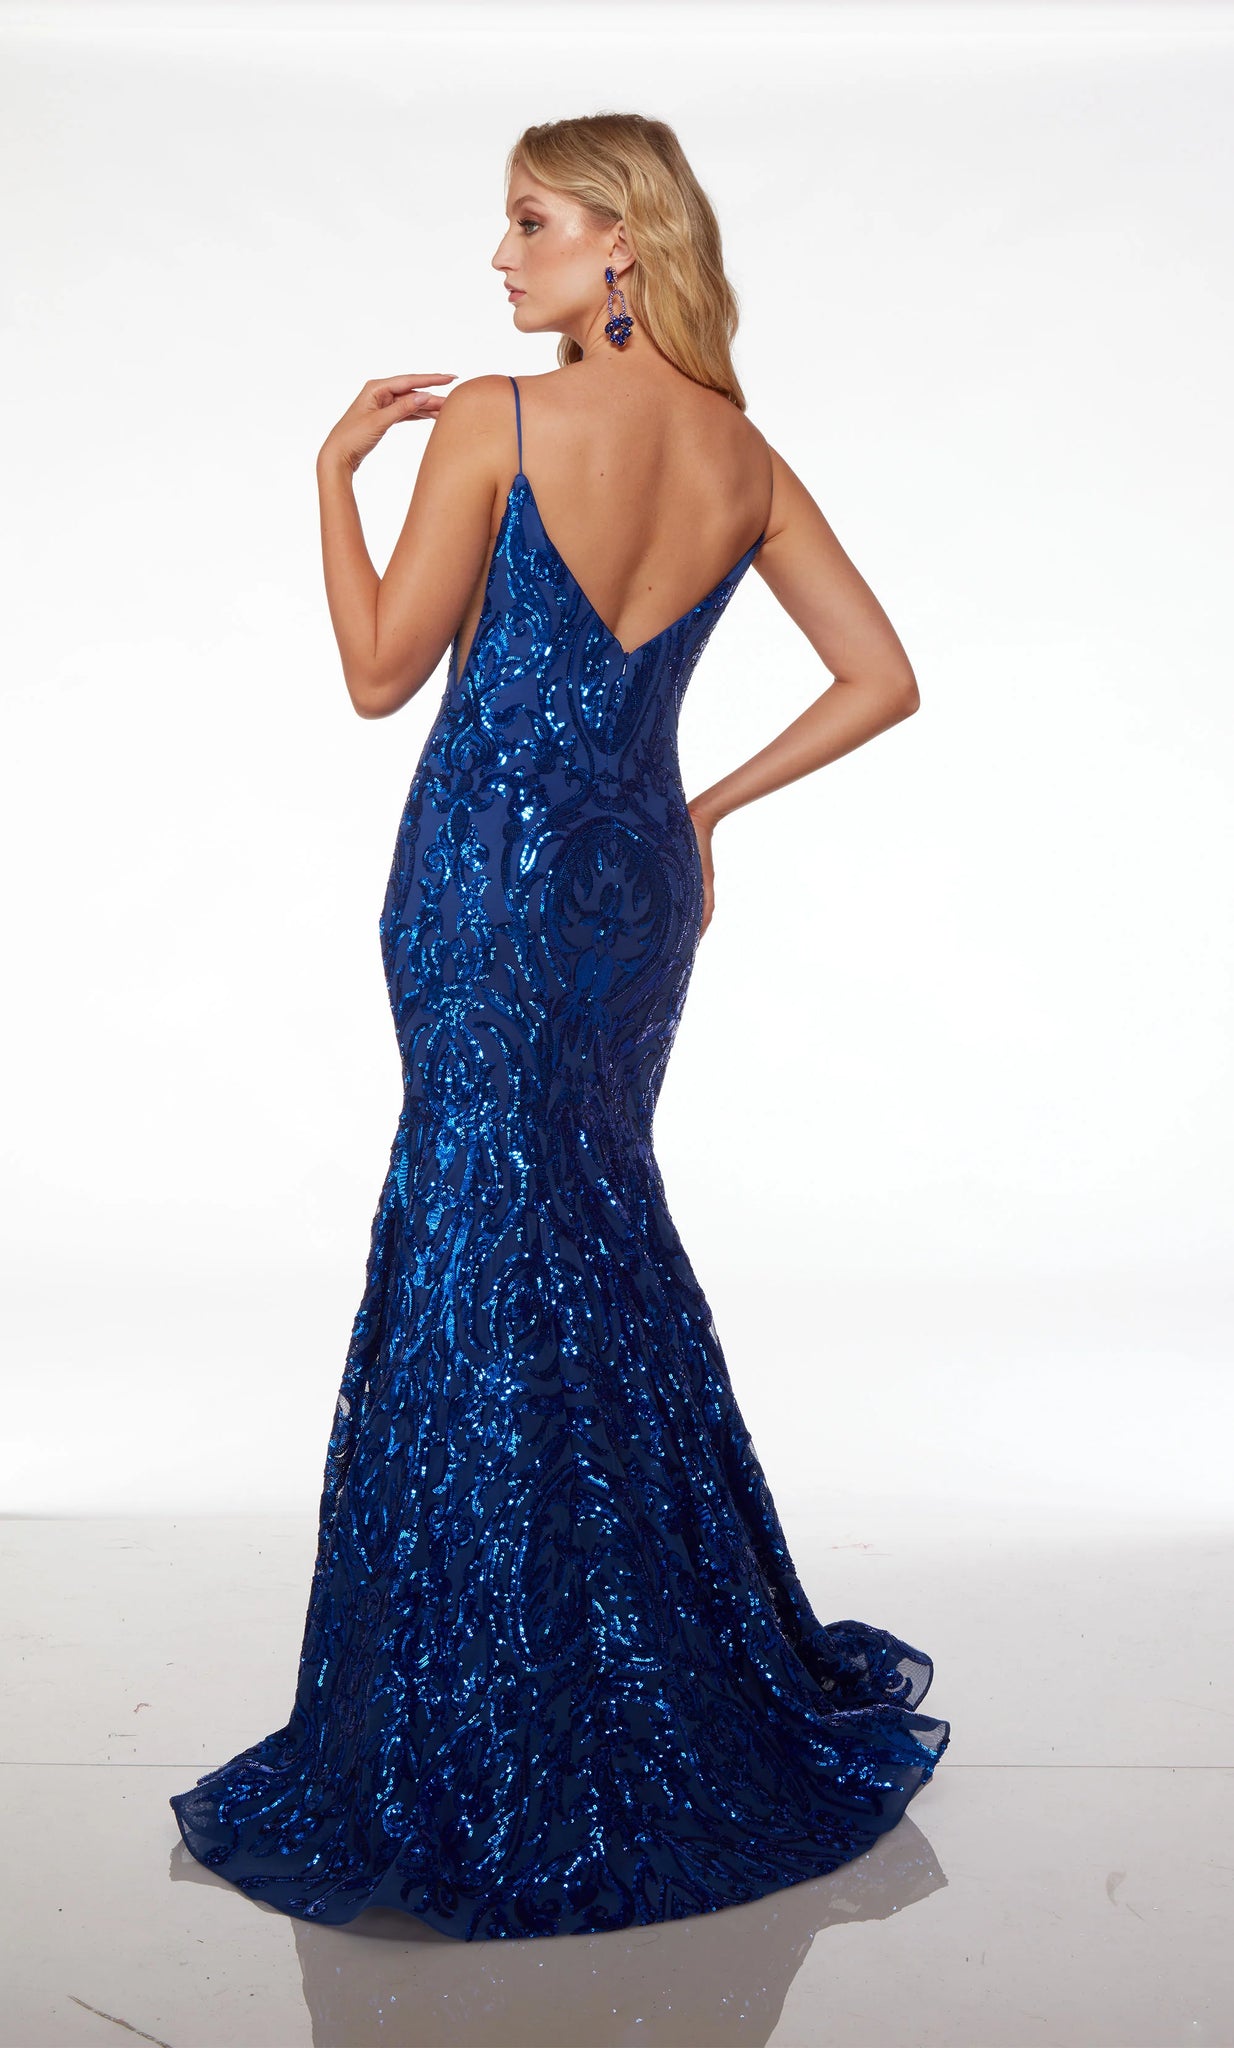 Turn heads when you step into the room wearing this captivating fully beaded Alyce Paris long prom dress 61607. The fitted zip up bodice features a trendy V neckline and the skirt has a long glistening sweep train. Whimsical sequin beaded patterns adorn the entirety of the dress giving you ideal radiance and detail.